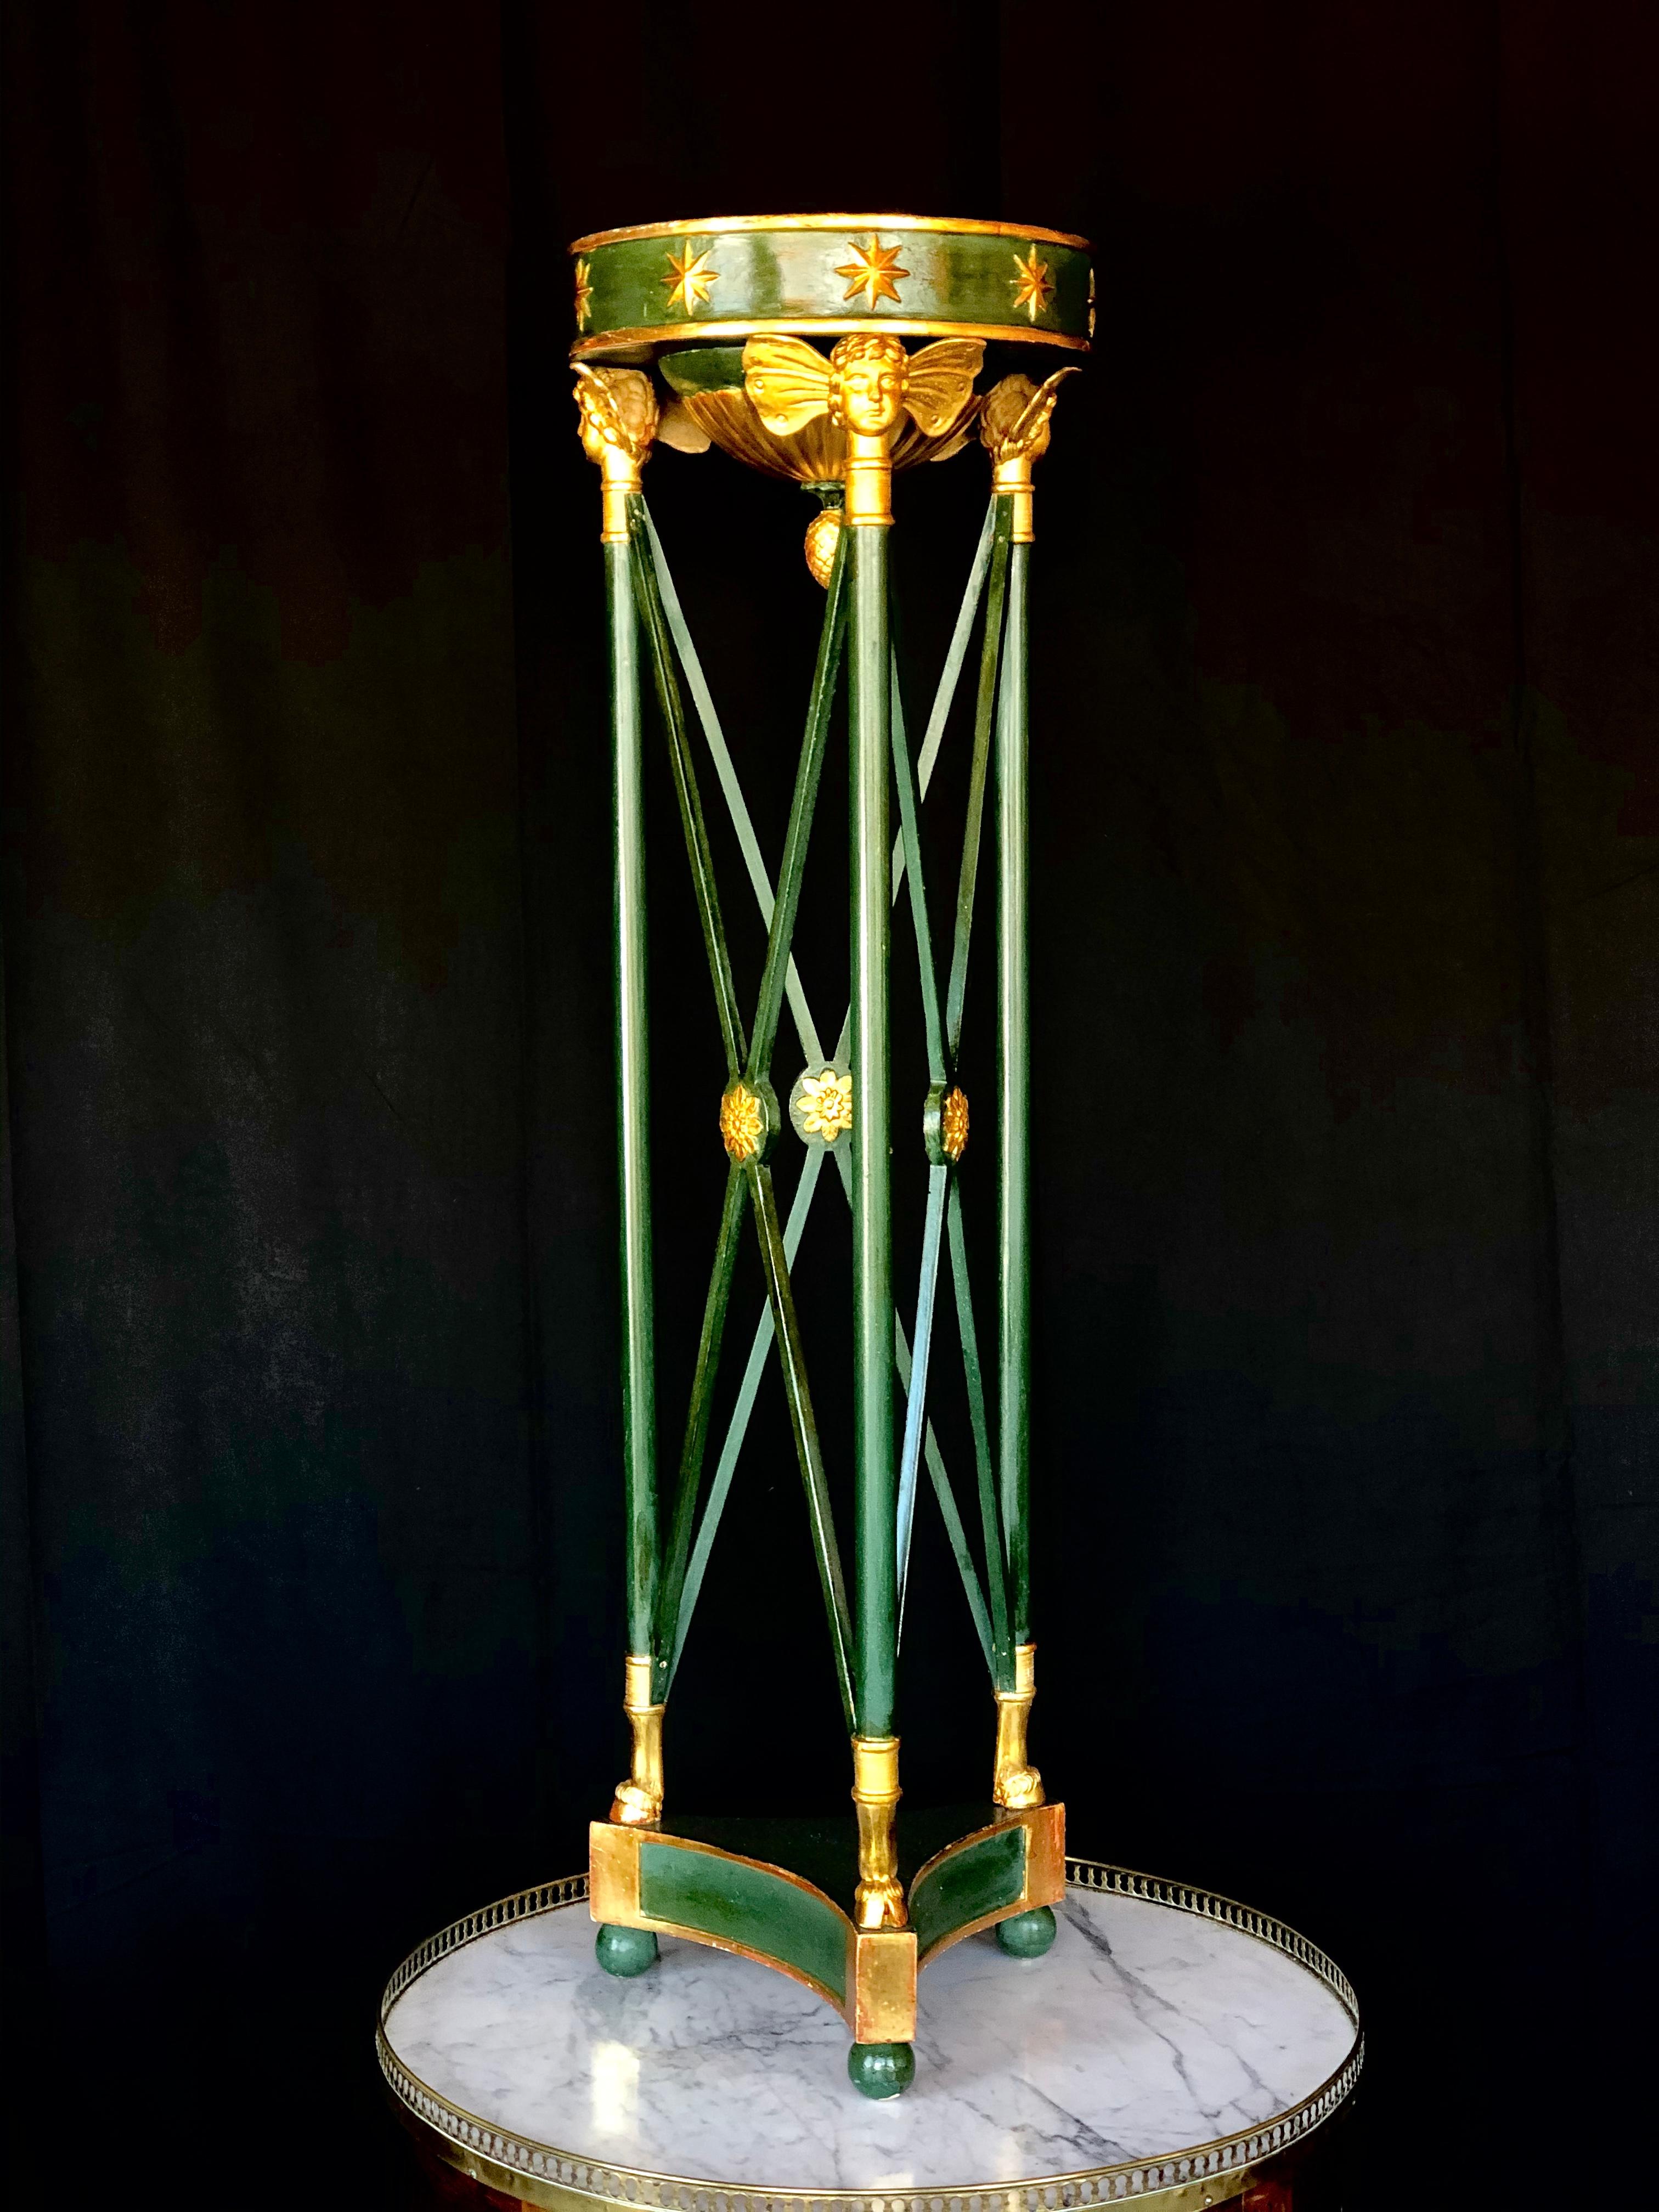 A handsome green painted neoclassical stand with gilt accents. Early 20th century.